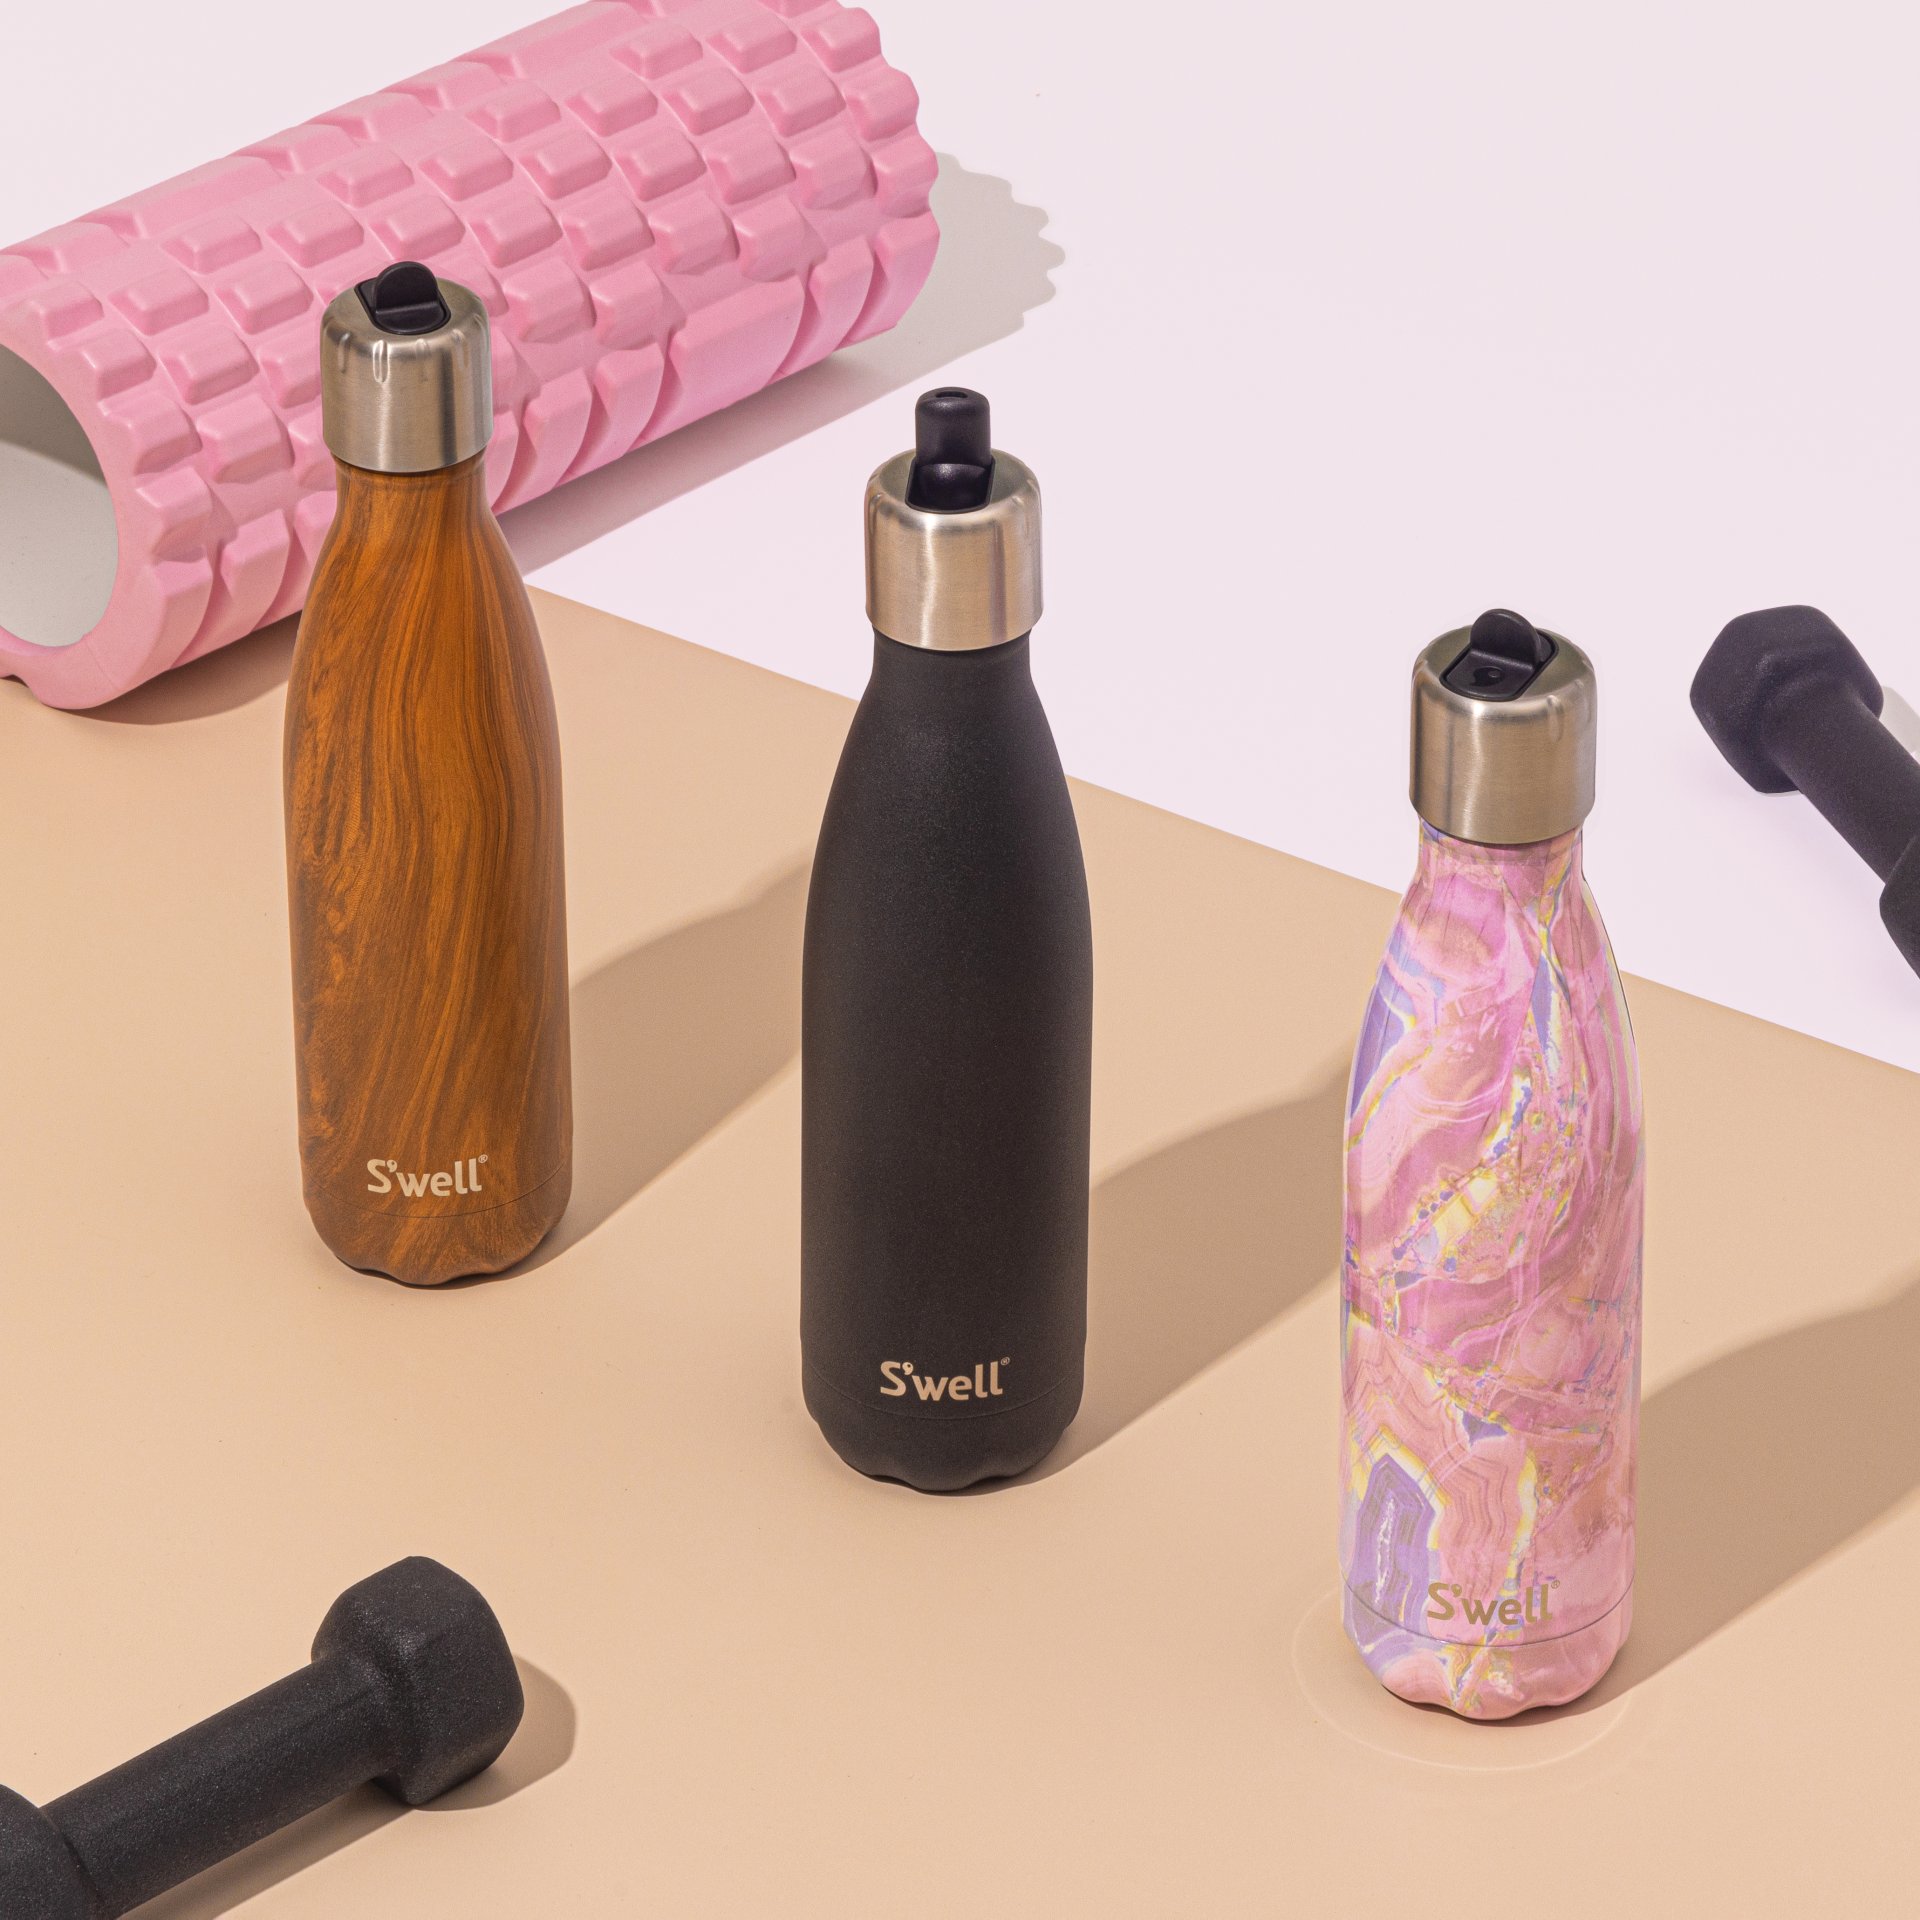 Three different colours of S'Well water bottles are laid out alongside workout equipment.